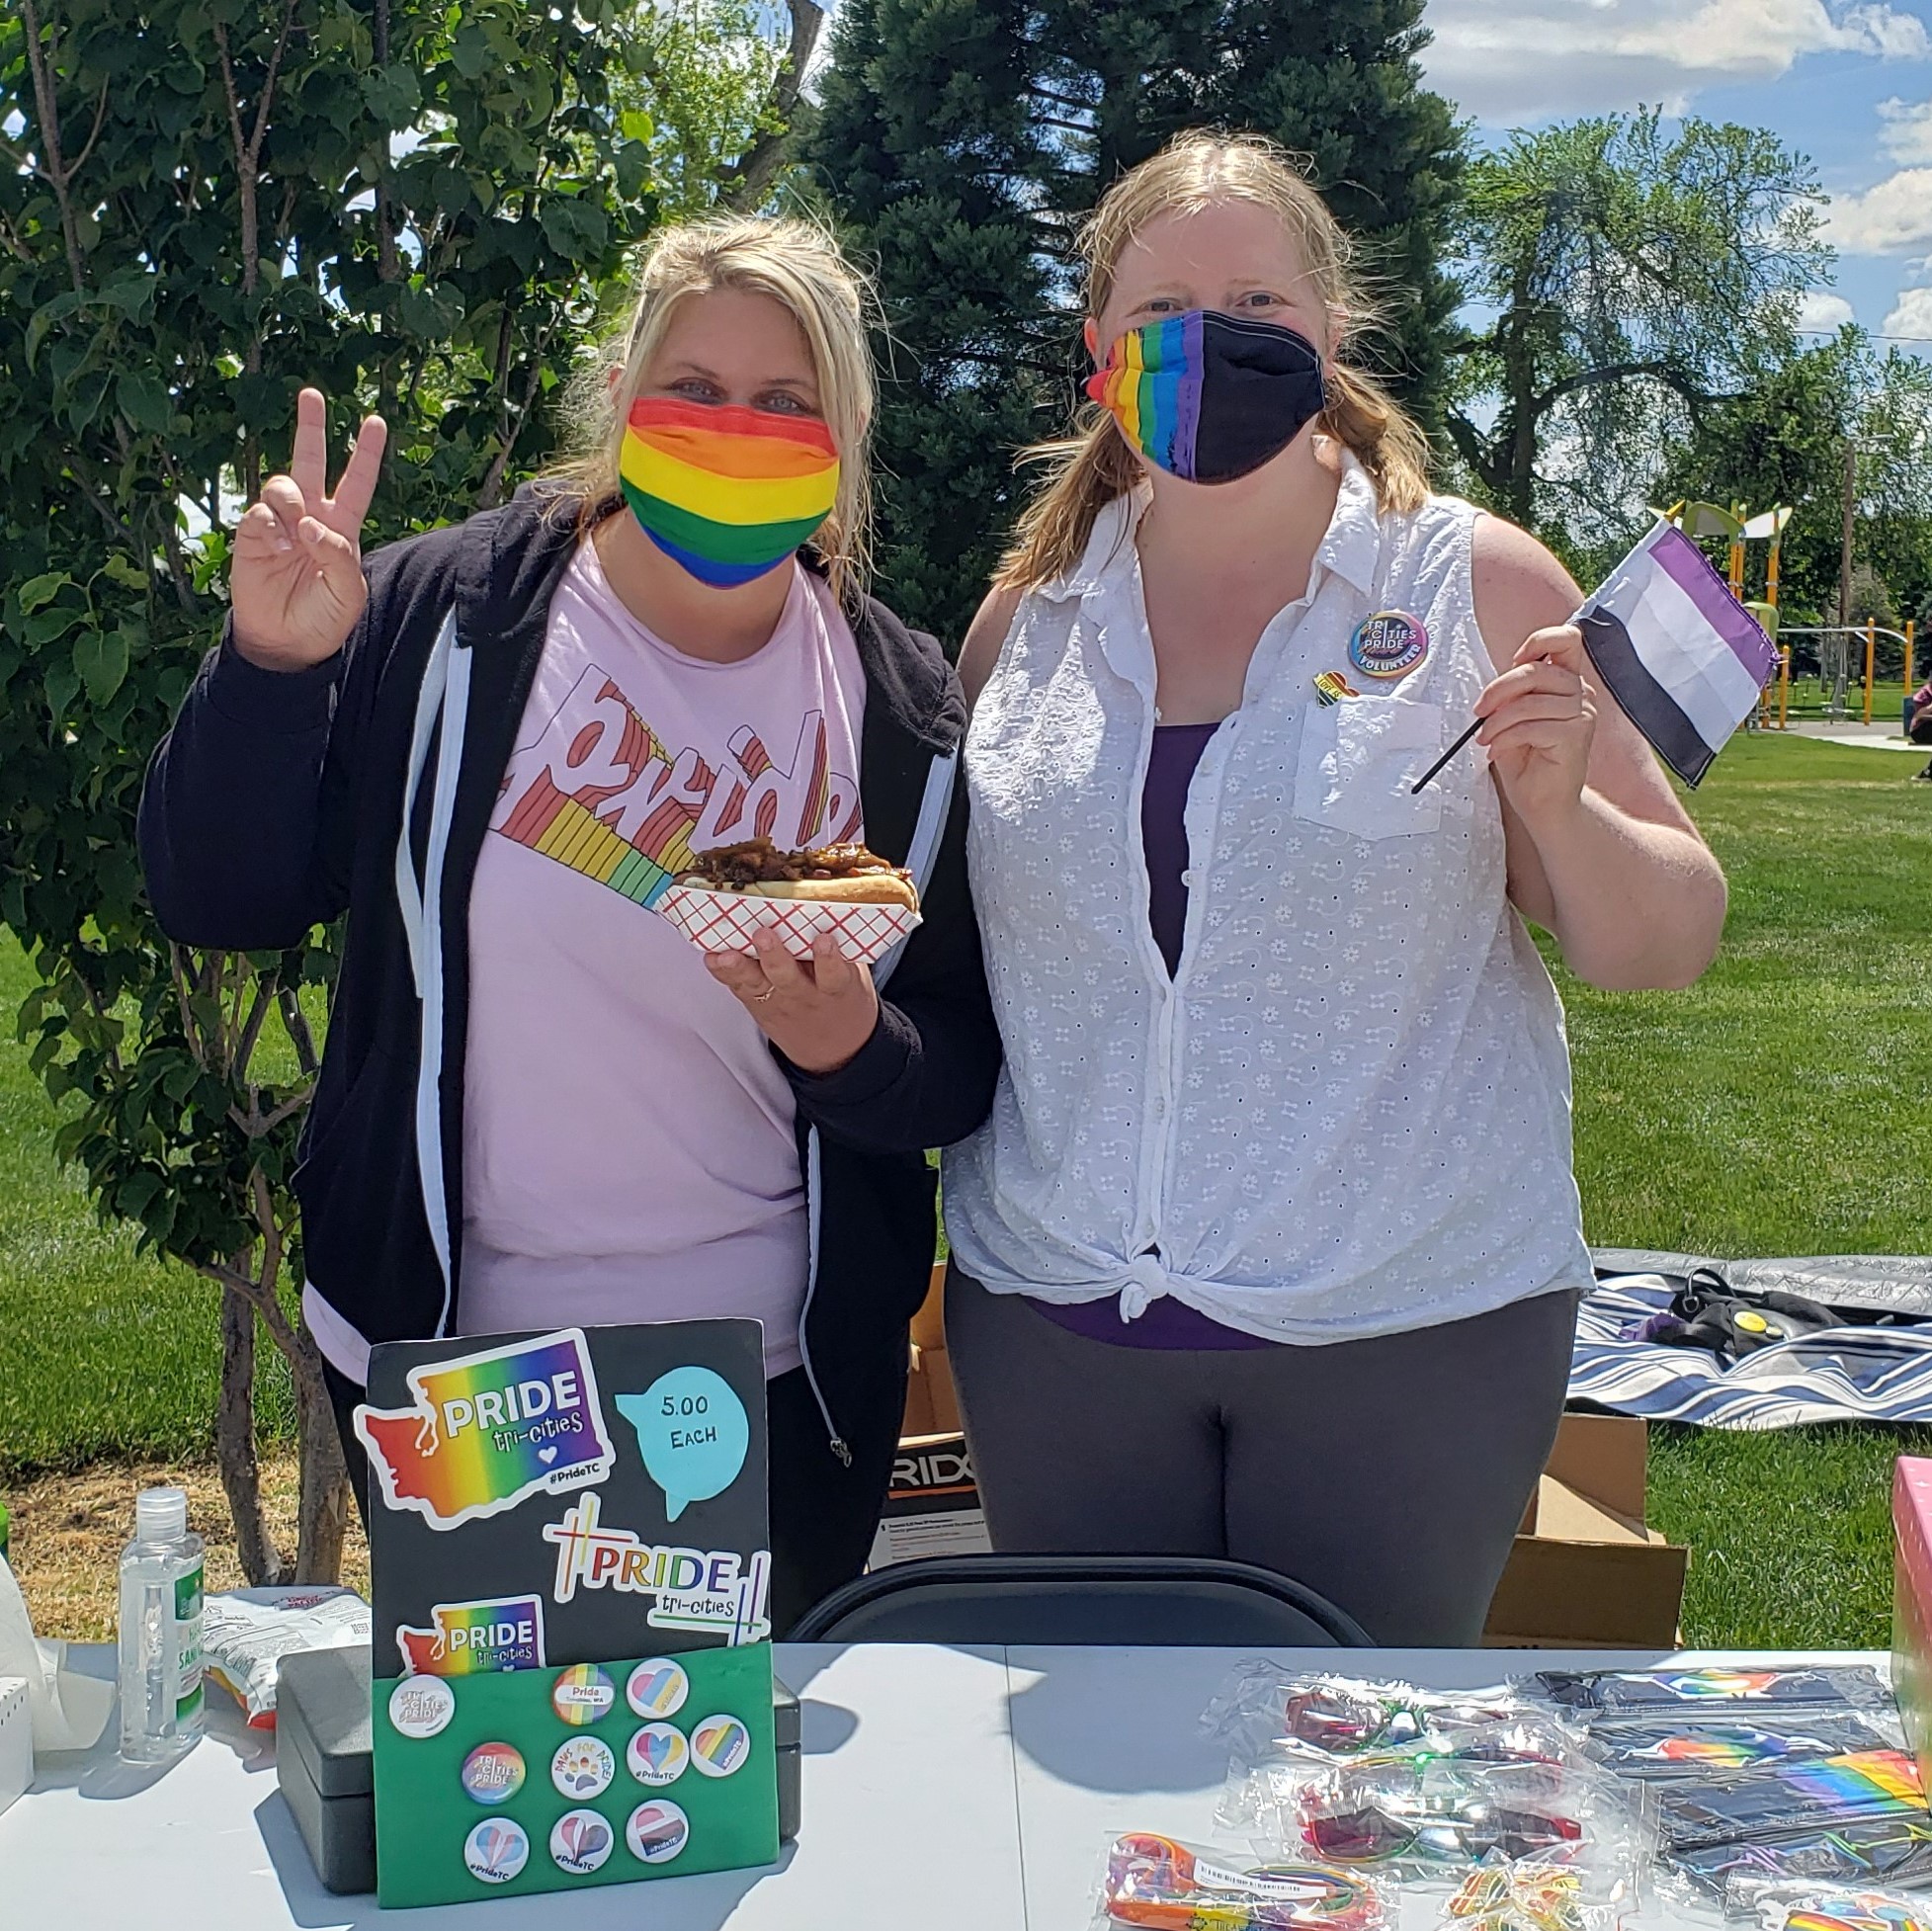 Kim and a friend are standing behind a table at a Pride event wearing rainbow masks on a sunny day.